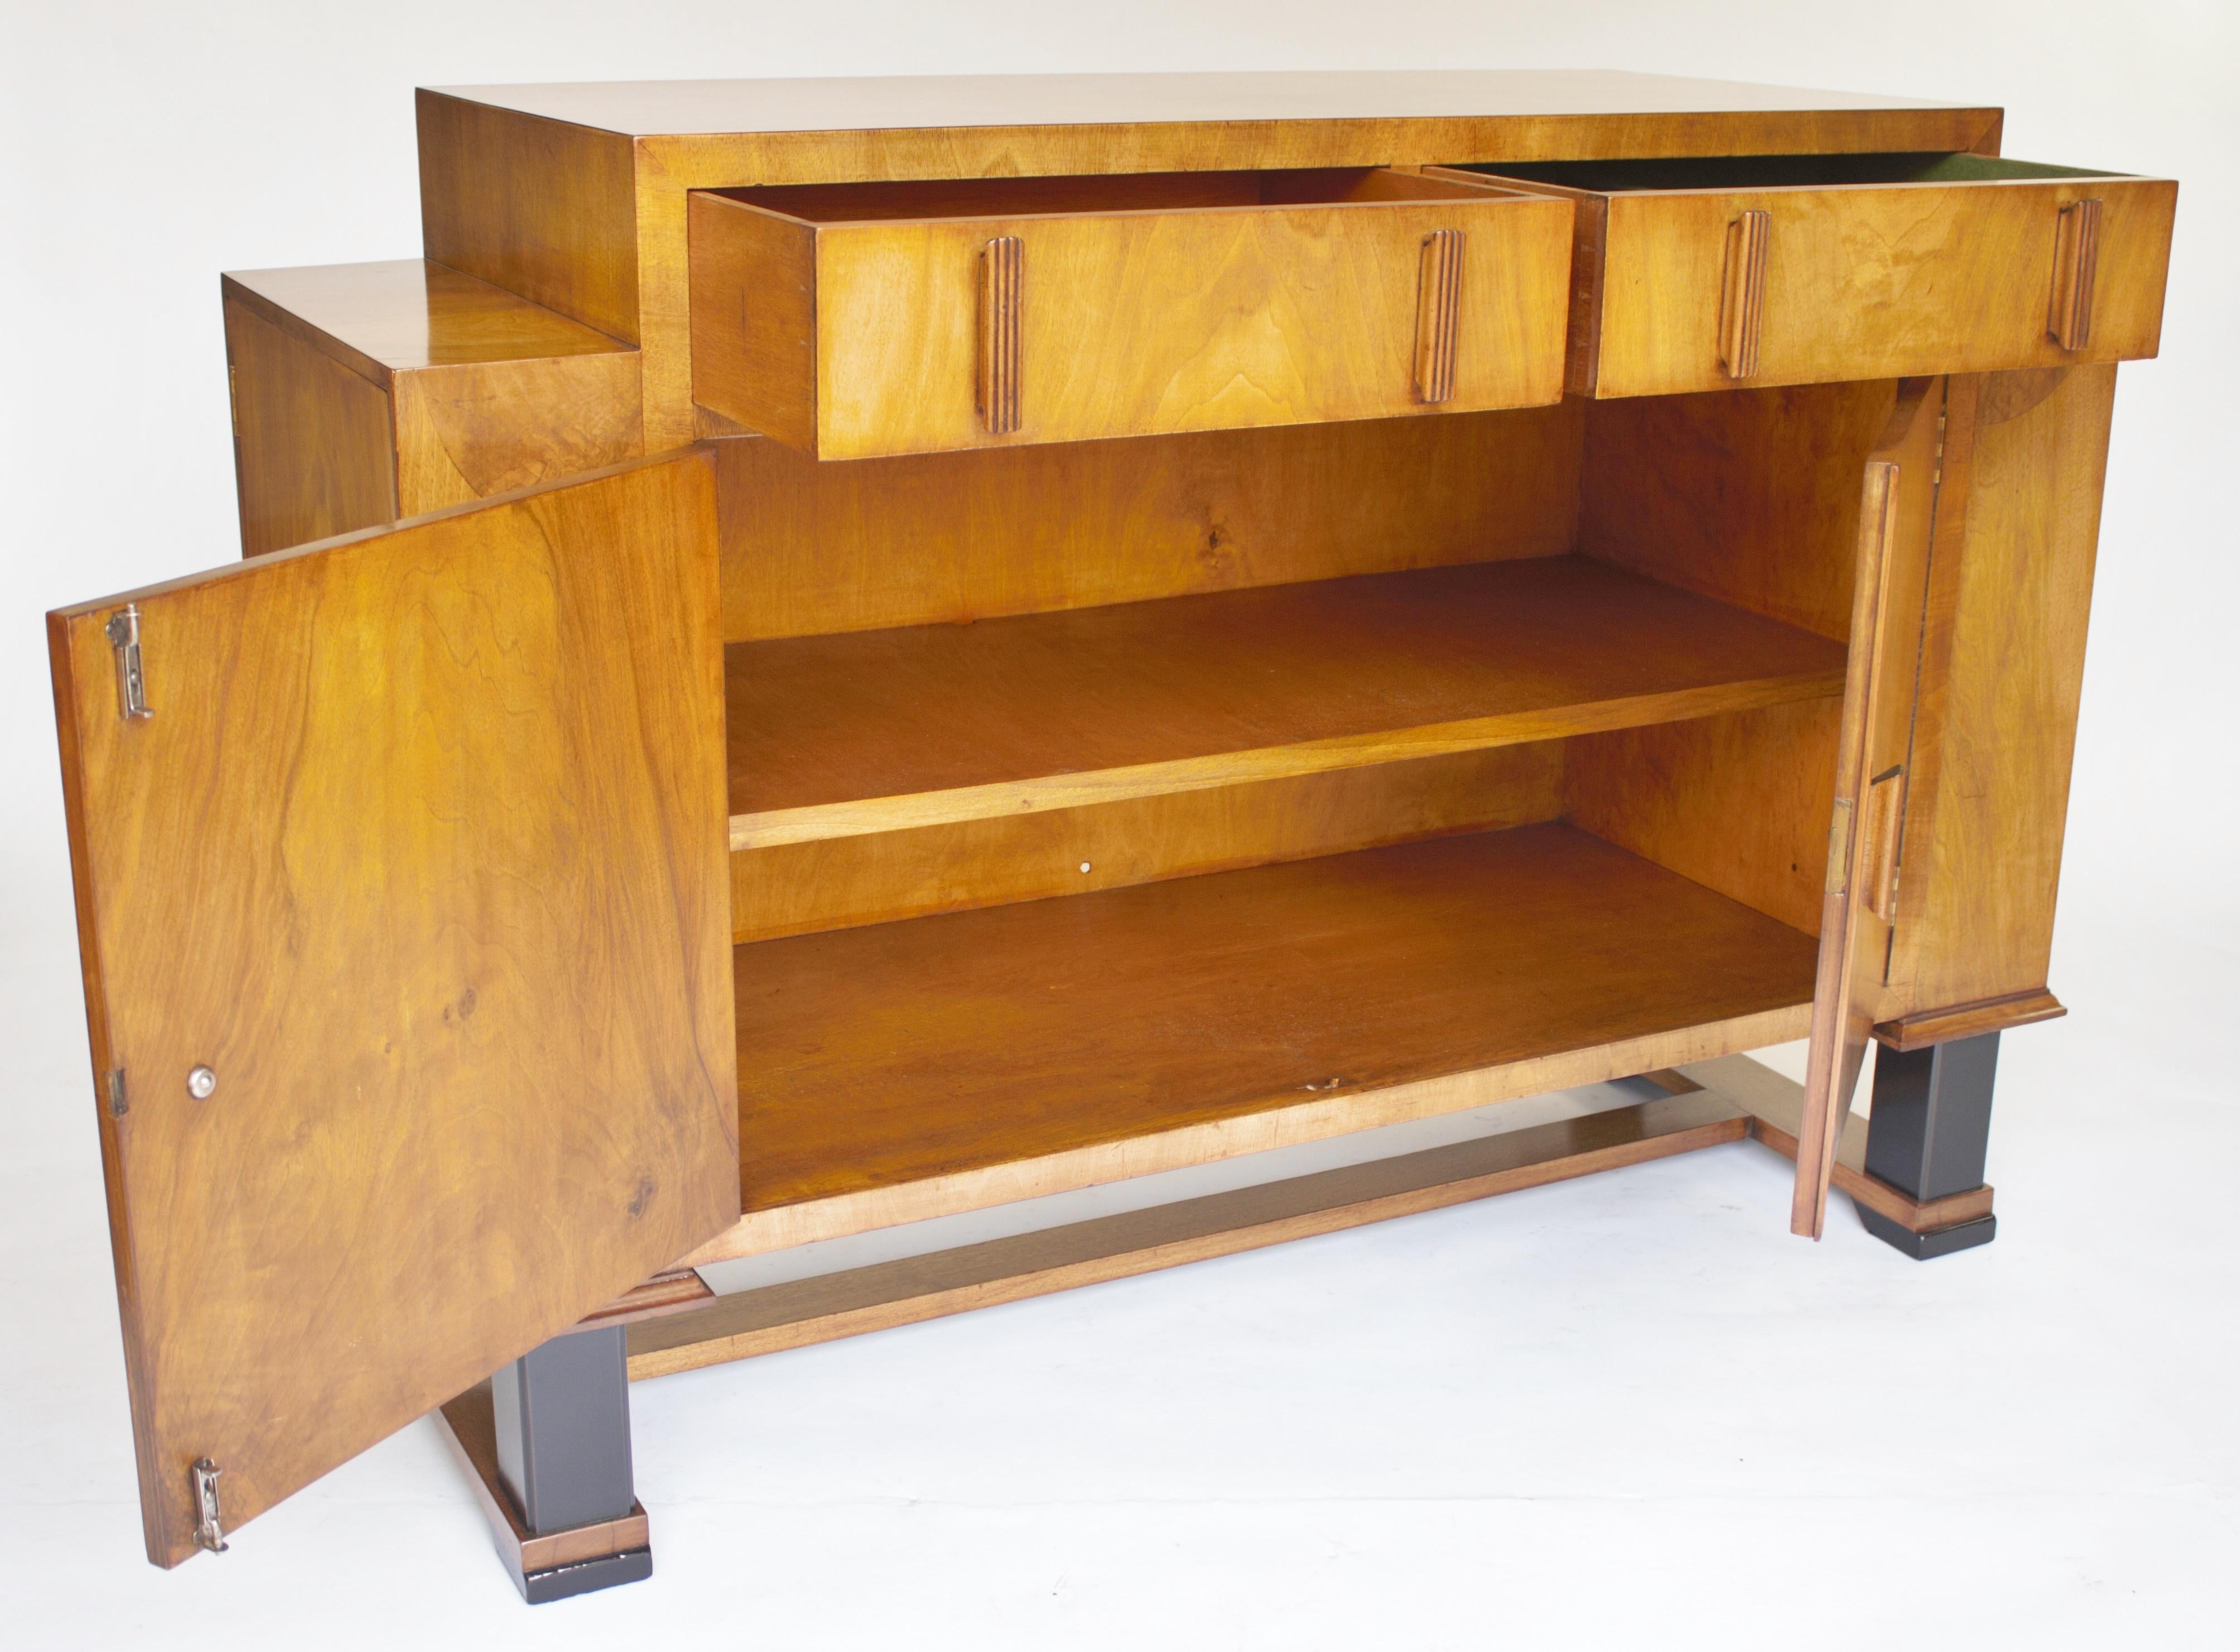 Art Deco Walnut Sideboard circa 1930s
Figured Walnut veneer, 
2 drawers at top , R/h drawer lined with green baize for cutlery,
2 doors below with ball catch, open to reveal:
single shelf interior,
Single door cupboards each side, with shelves